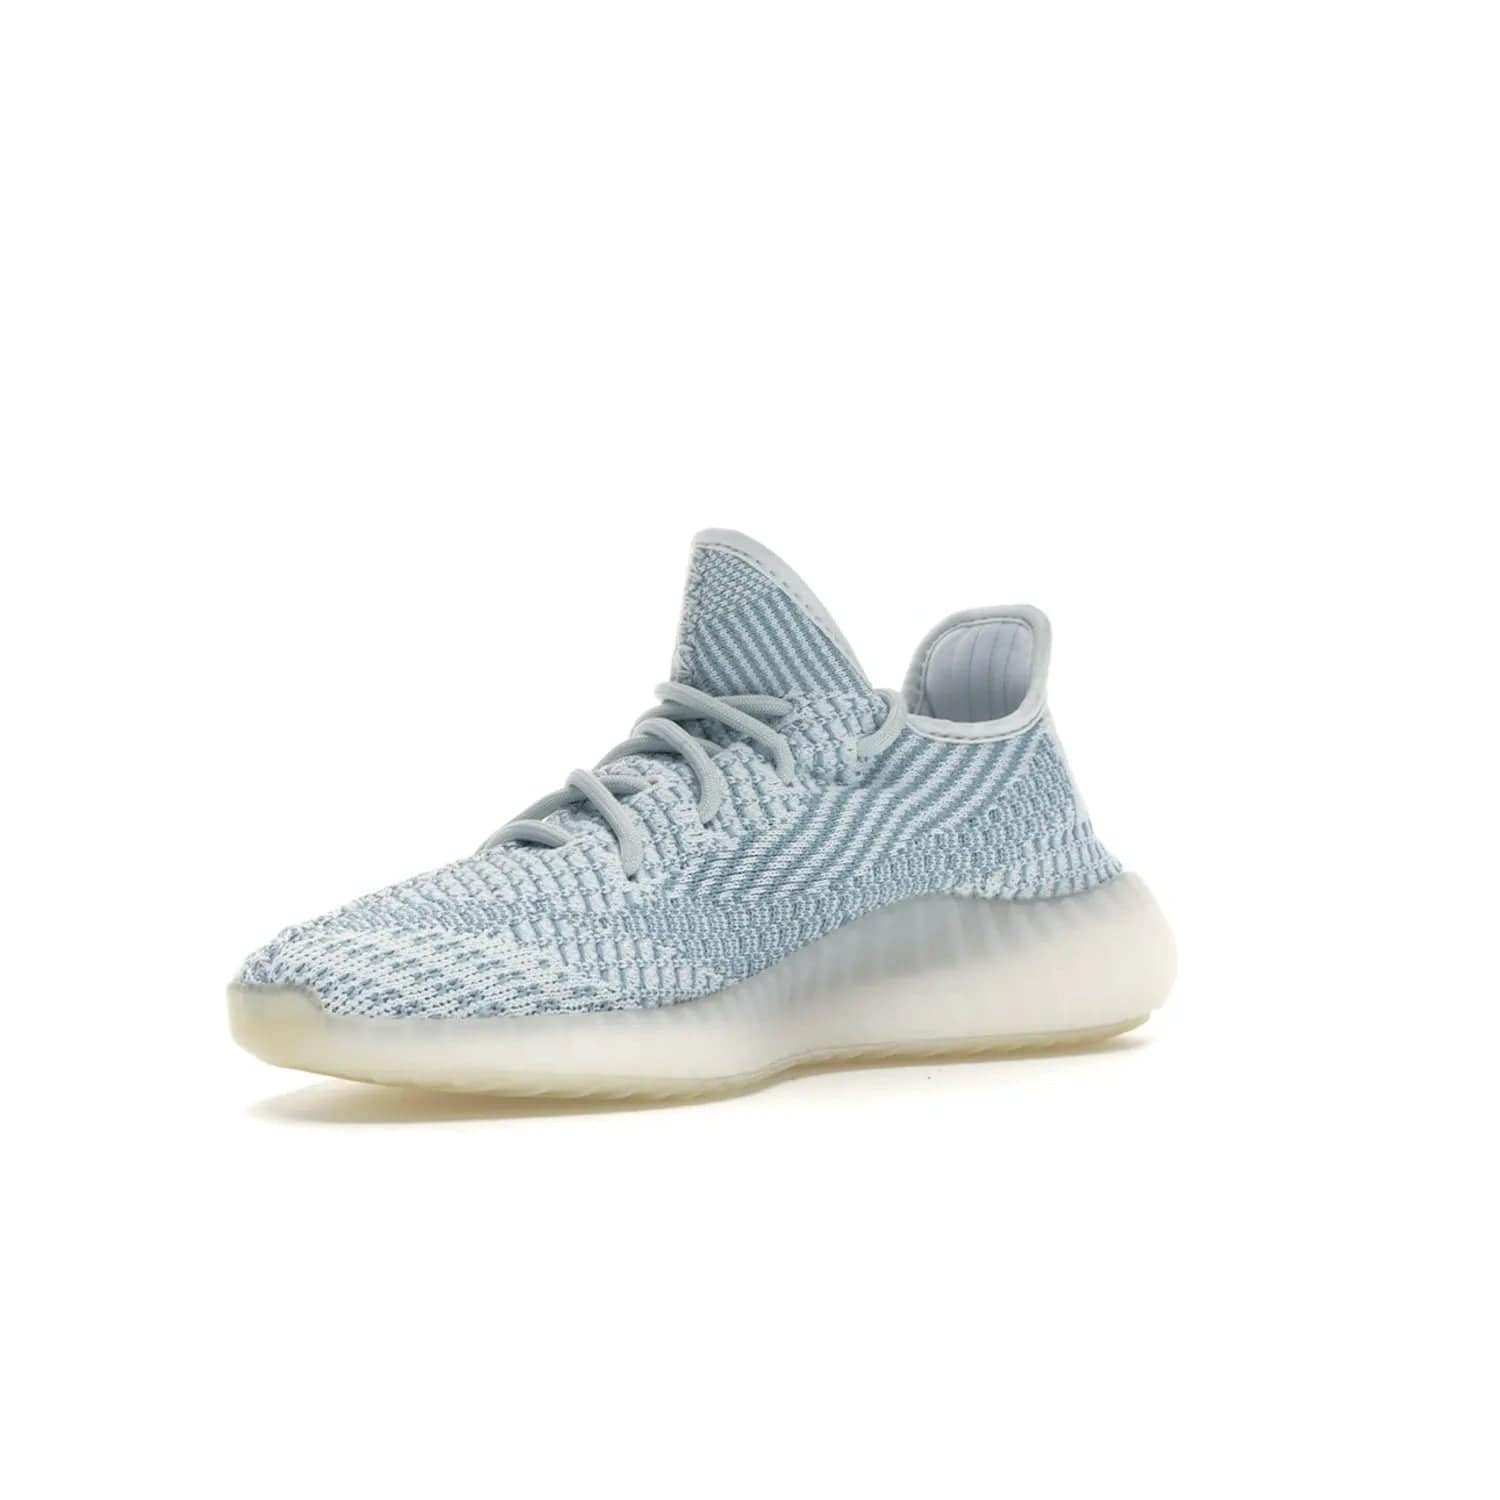 adidas Yeezy Boost 350 V2 Cloud White (Non-Reflective) - Image 15 - Only at www.BallersClubKickz.com - Uniquely designed adidas Yeezy Boost 350 V2 Cloud White (Non-Reflective) with a Primeknit upper in shades of cream and blue with a contrasting hard sole. A fashion-forward sneaker with a transparent strip and blue-and-white patterns.